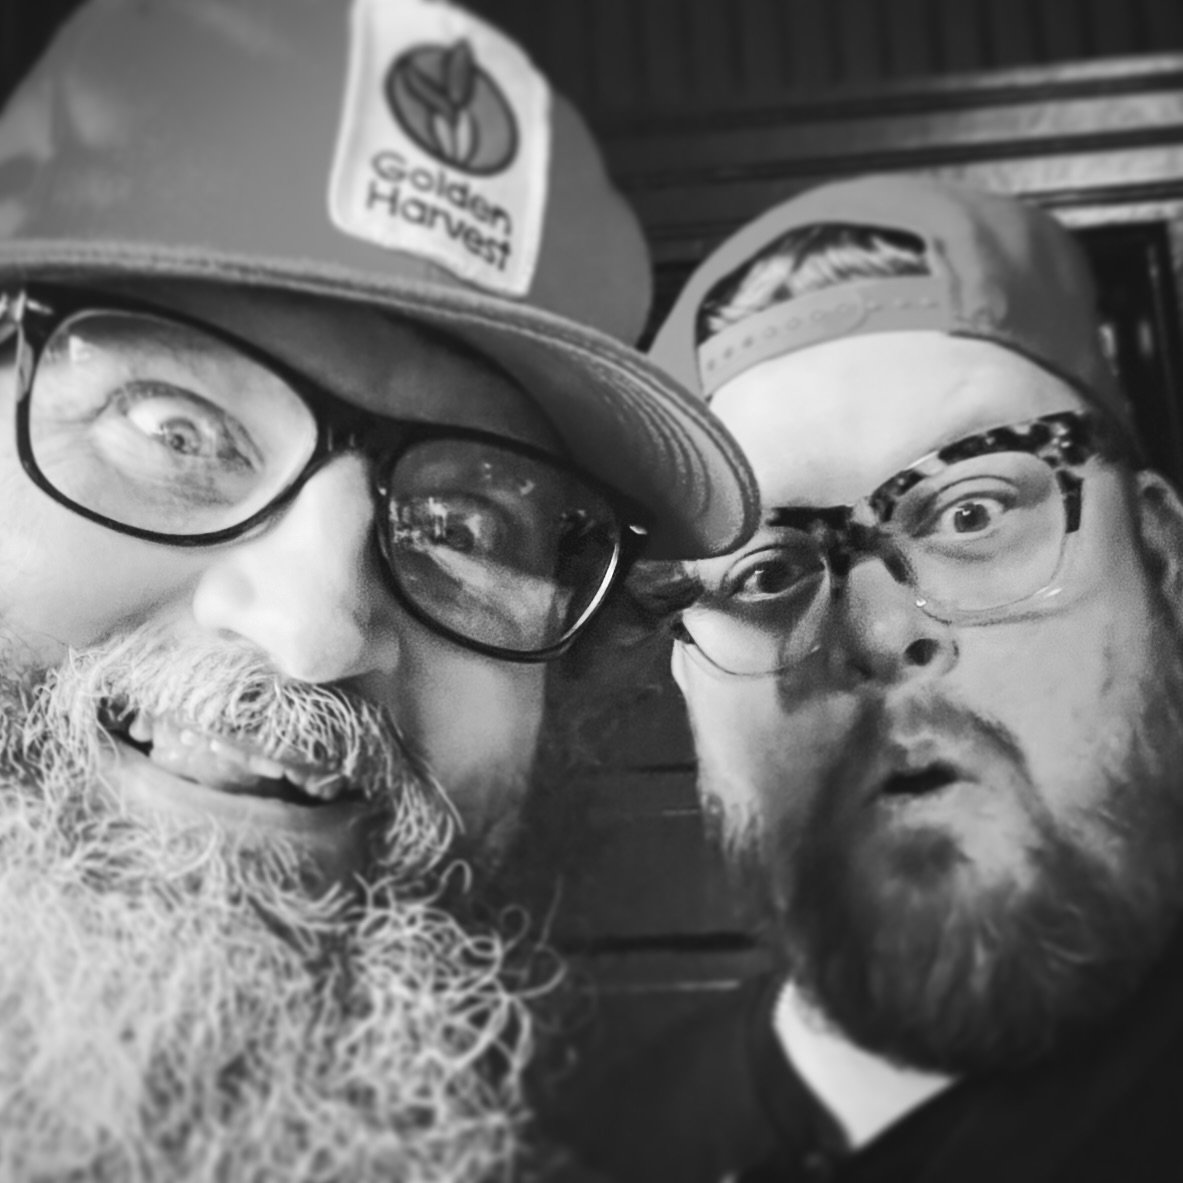 Anytime I get to spend with my great bud @draplin I cherish. Thank you for being such an inspiration in my life all these years. My man! 
🎸⚡️💥🔥🎤🛹🤘🏽🤌🏼🦷👑🍊⚾️🥁
Thank you @cropcons and the CROP FAM